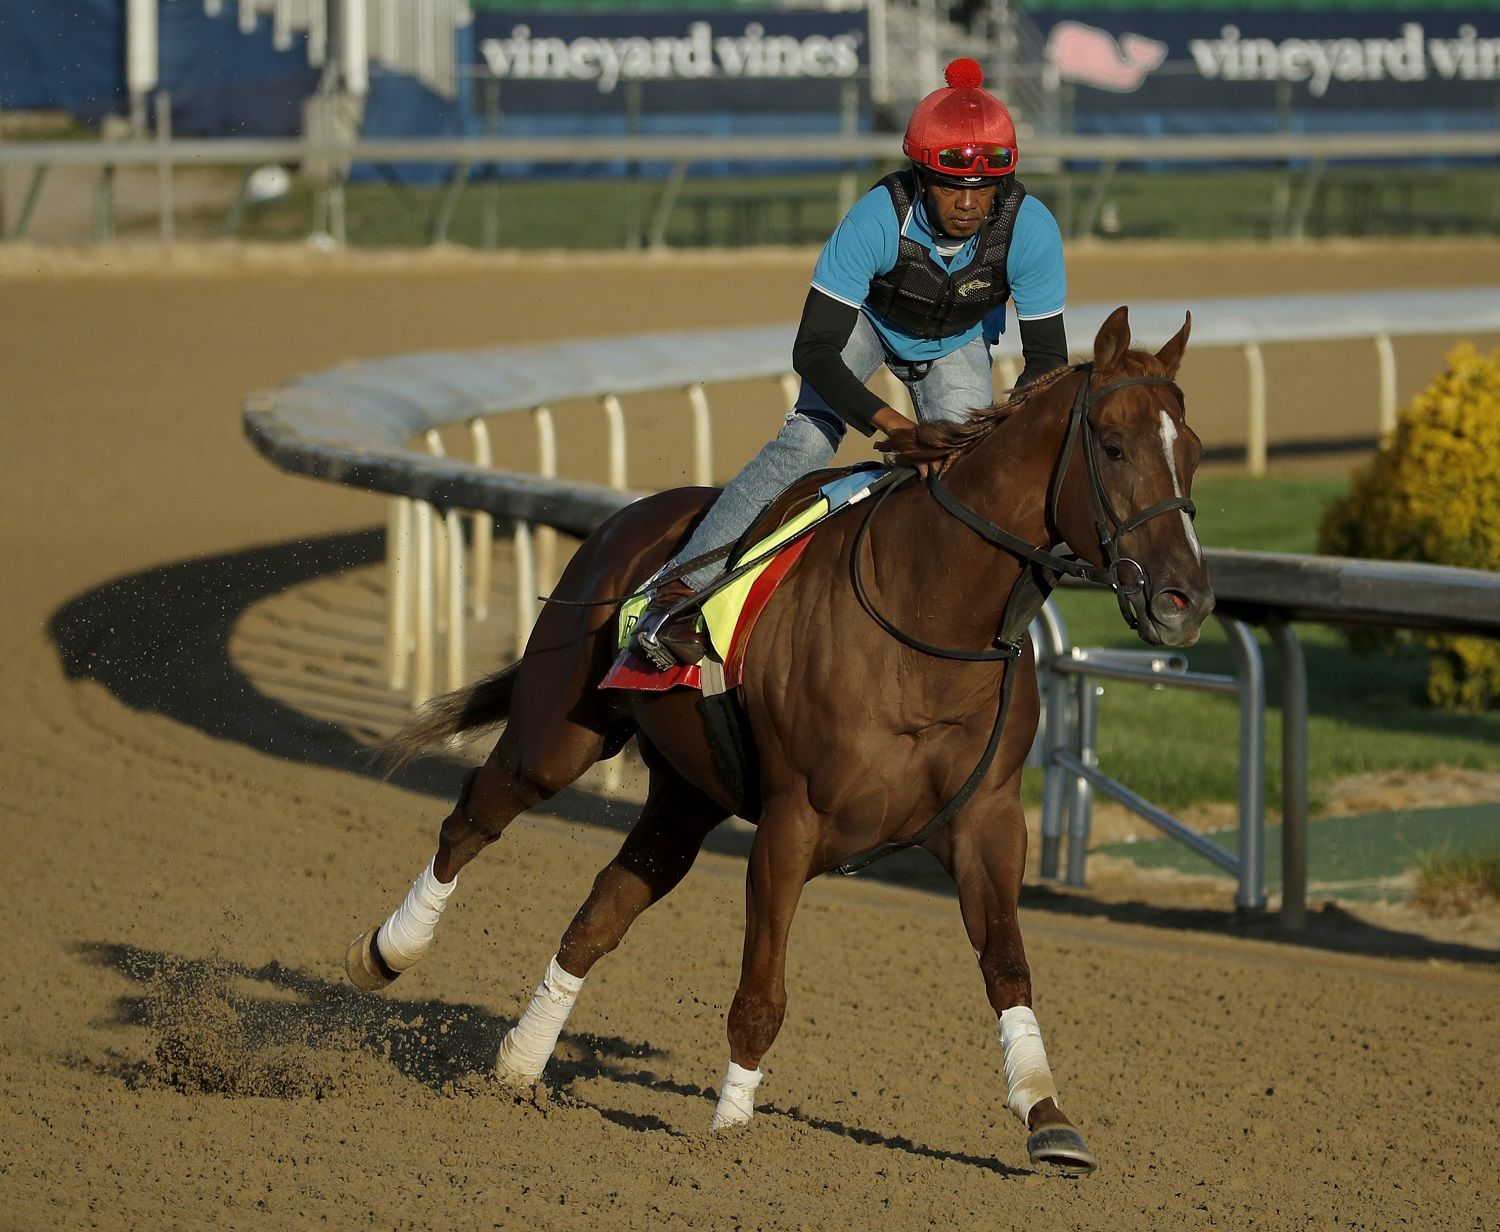 Kentucky Derby hopeful Flameaway runs during a morning workout at Churchill Downs Tuesday, May 1, 2018, in Louisville, Ky. The 144th running of the Kentucky Derby is scheduled for Saturday, May 5. (AP Photo/Charlie Riedel)